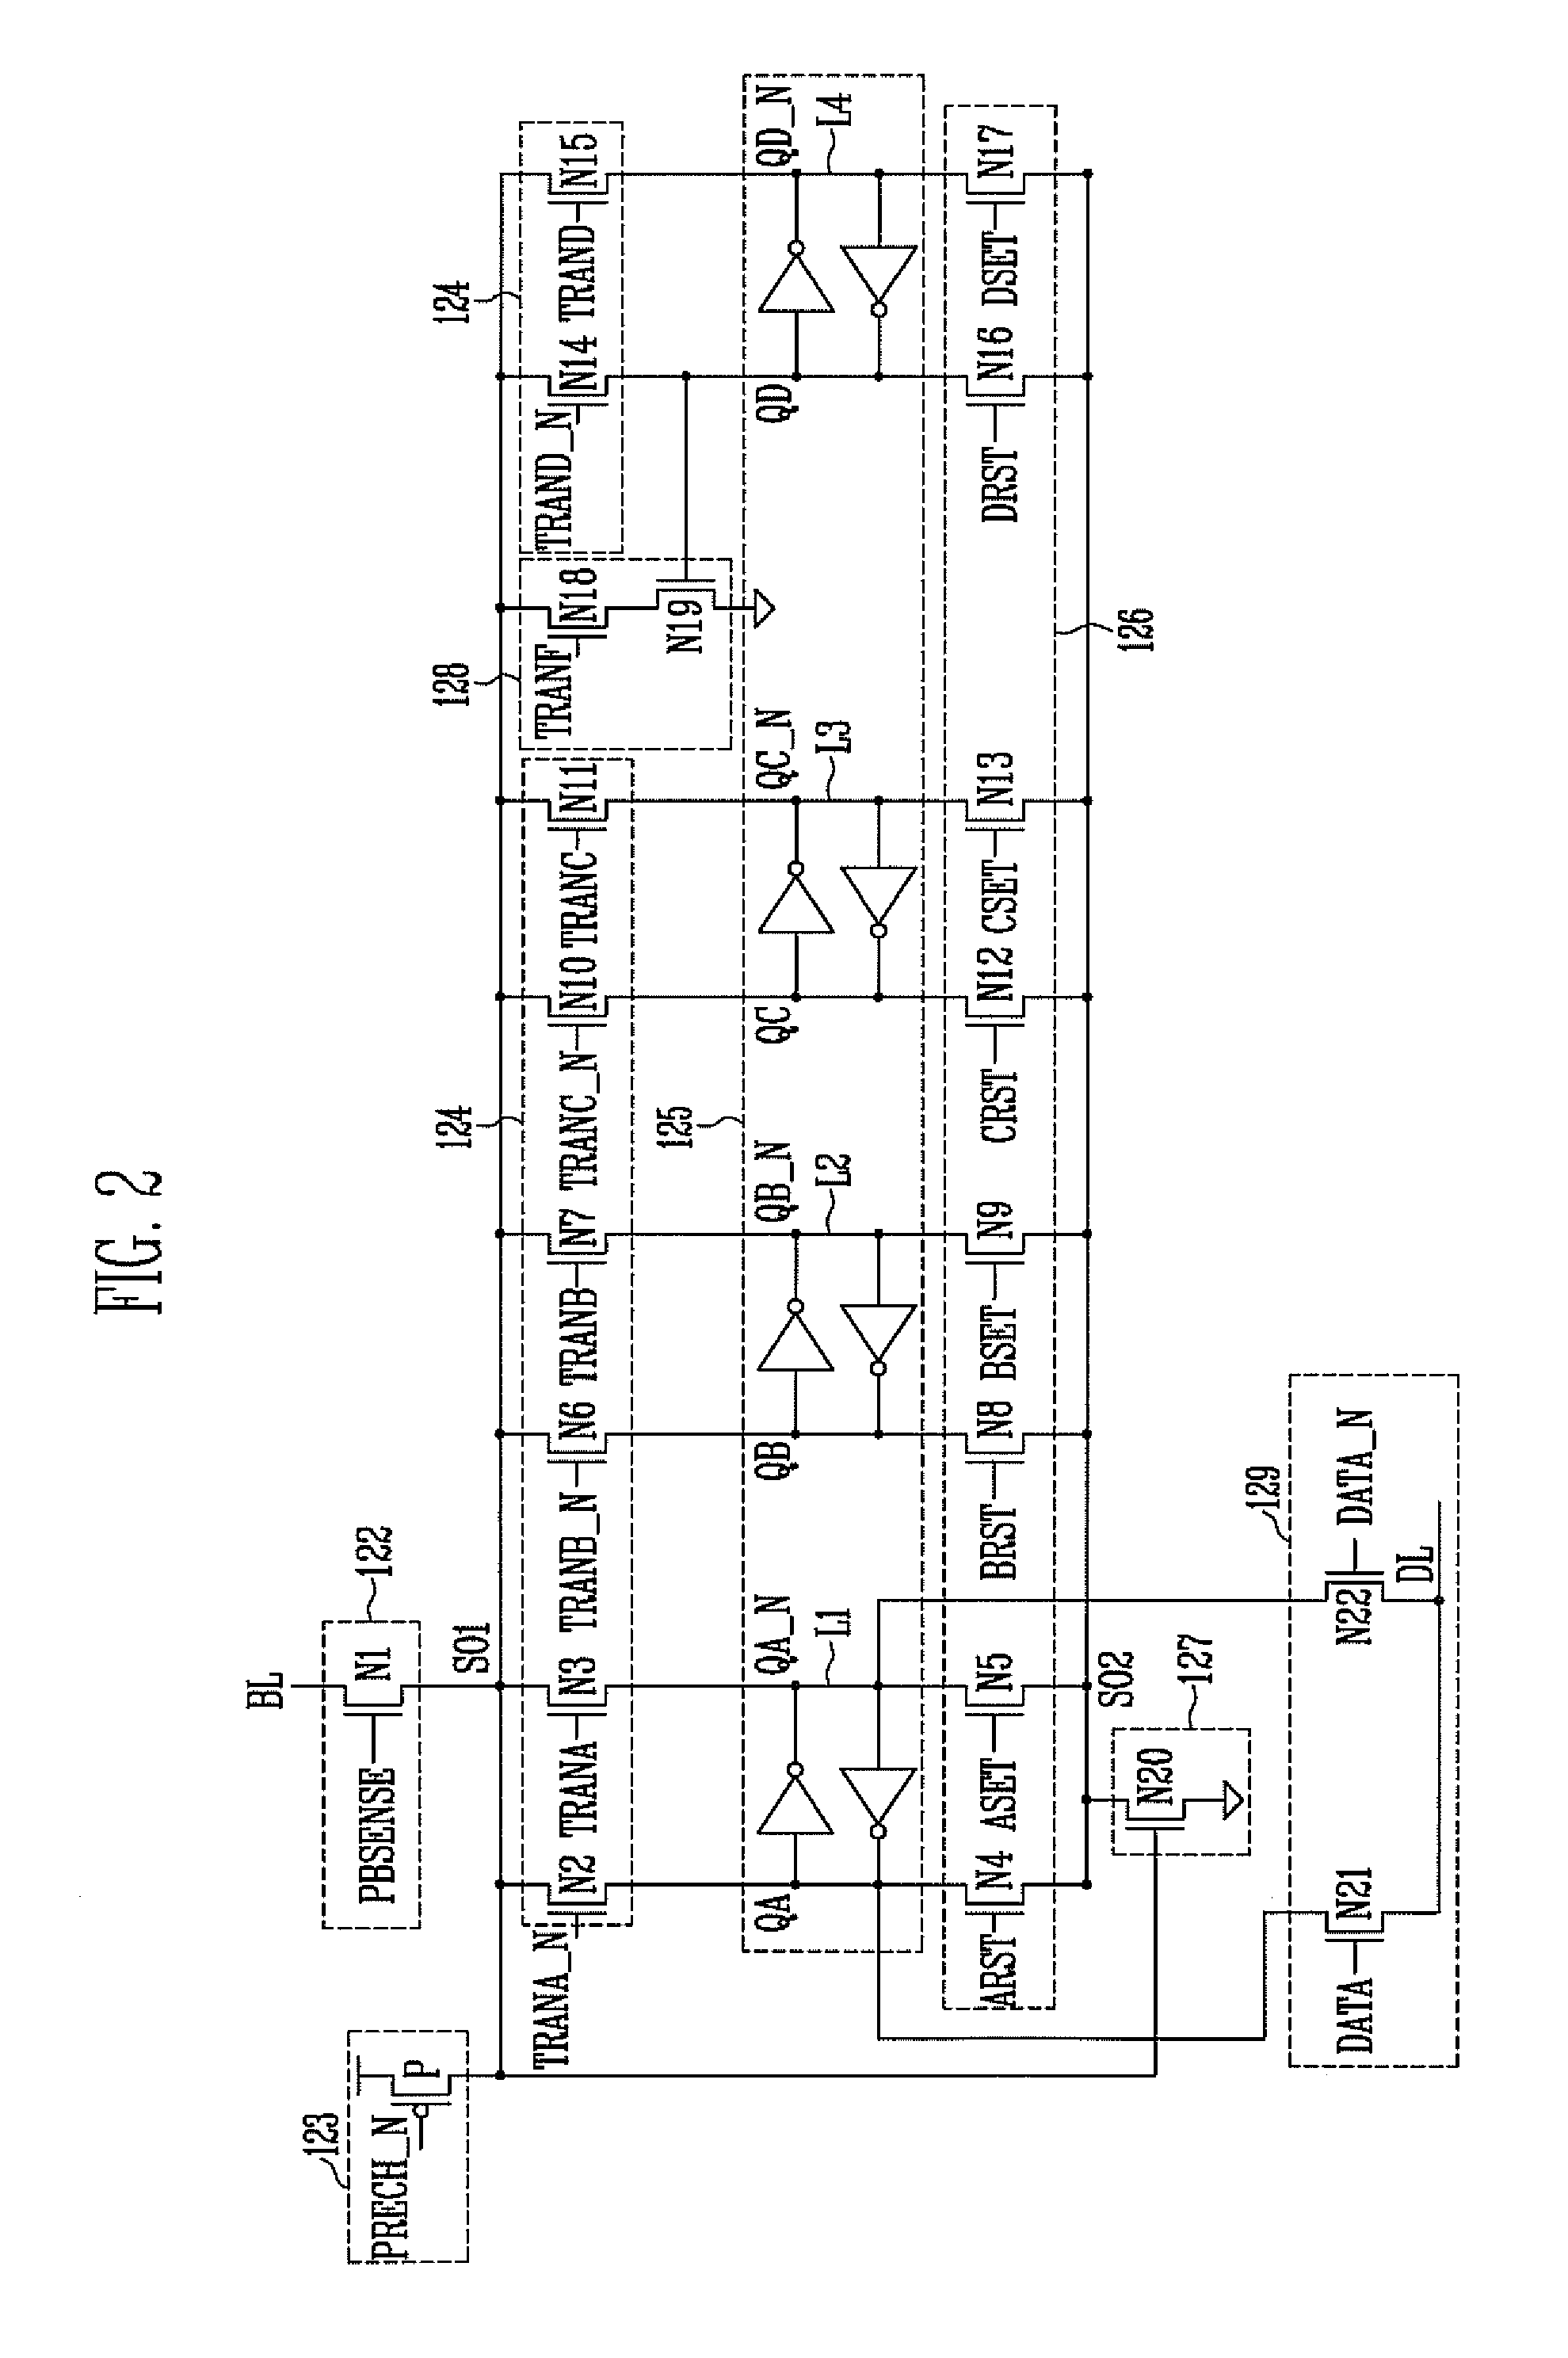 Method of programming a semiconductor memory device